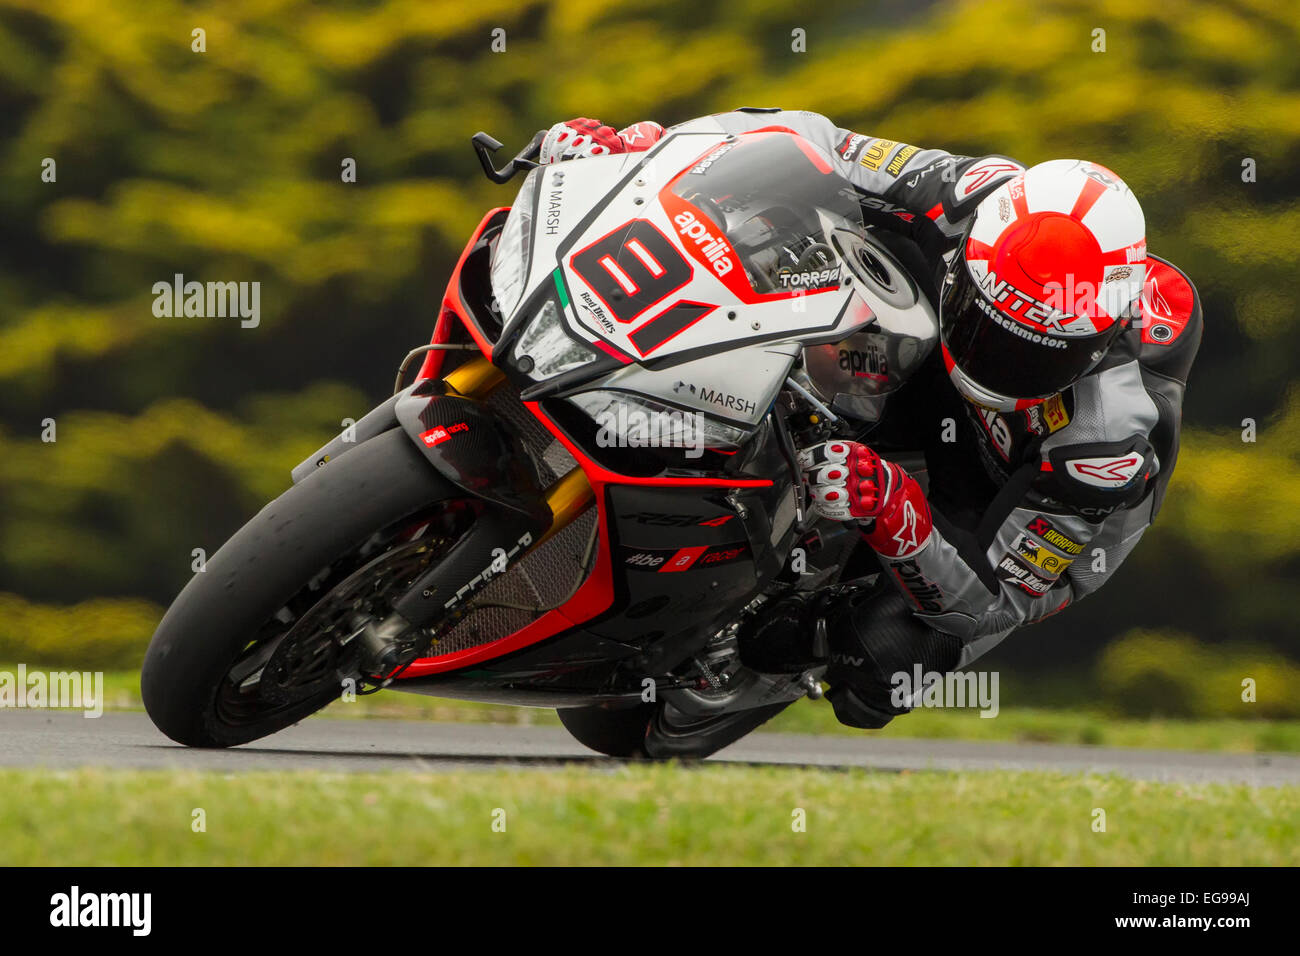 Phillip Island, Australia. Friday, 20 February, 2015. Free Practice Session 1. Jordi Torres, Aprilia Racing World Superbike Team. Jordi Torres passing through Lukey Heights at Phillip Island during Friday free practice. Torres managed to finish the day with the fastest lap time of 1'31.242. Credit:  Russell Hunter/Alamy Live News Stock Photo